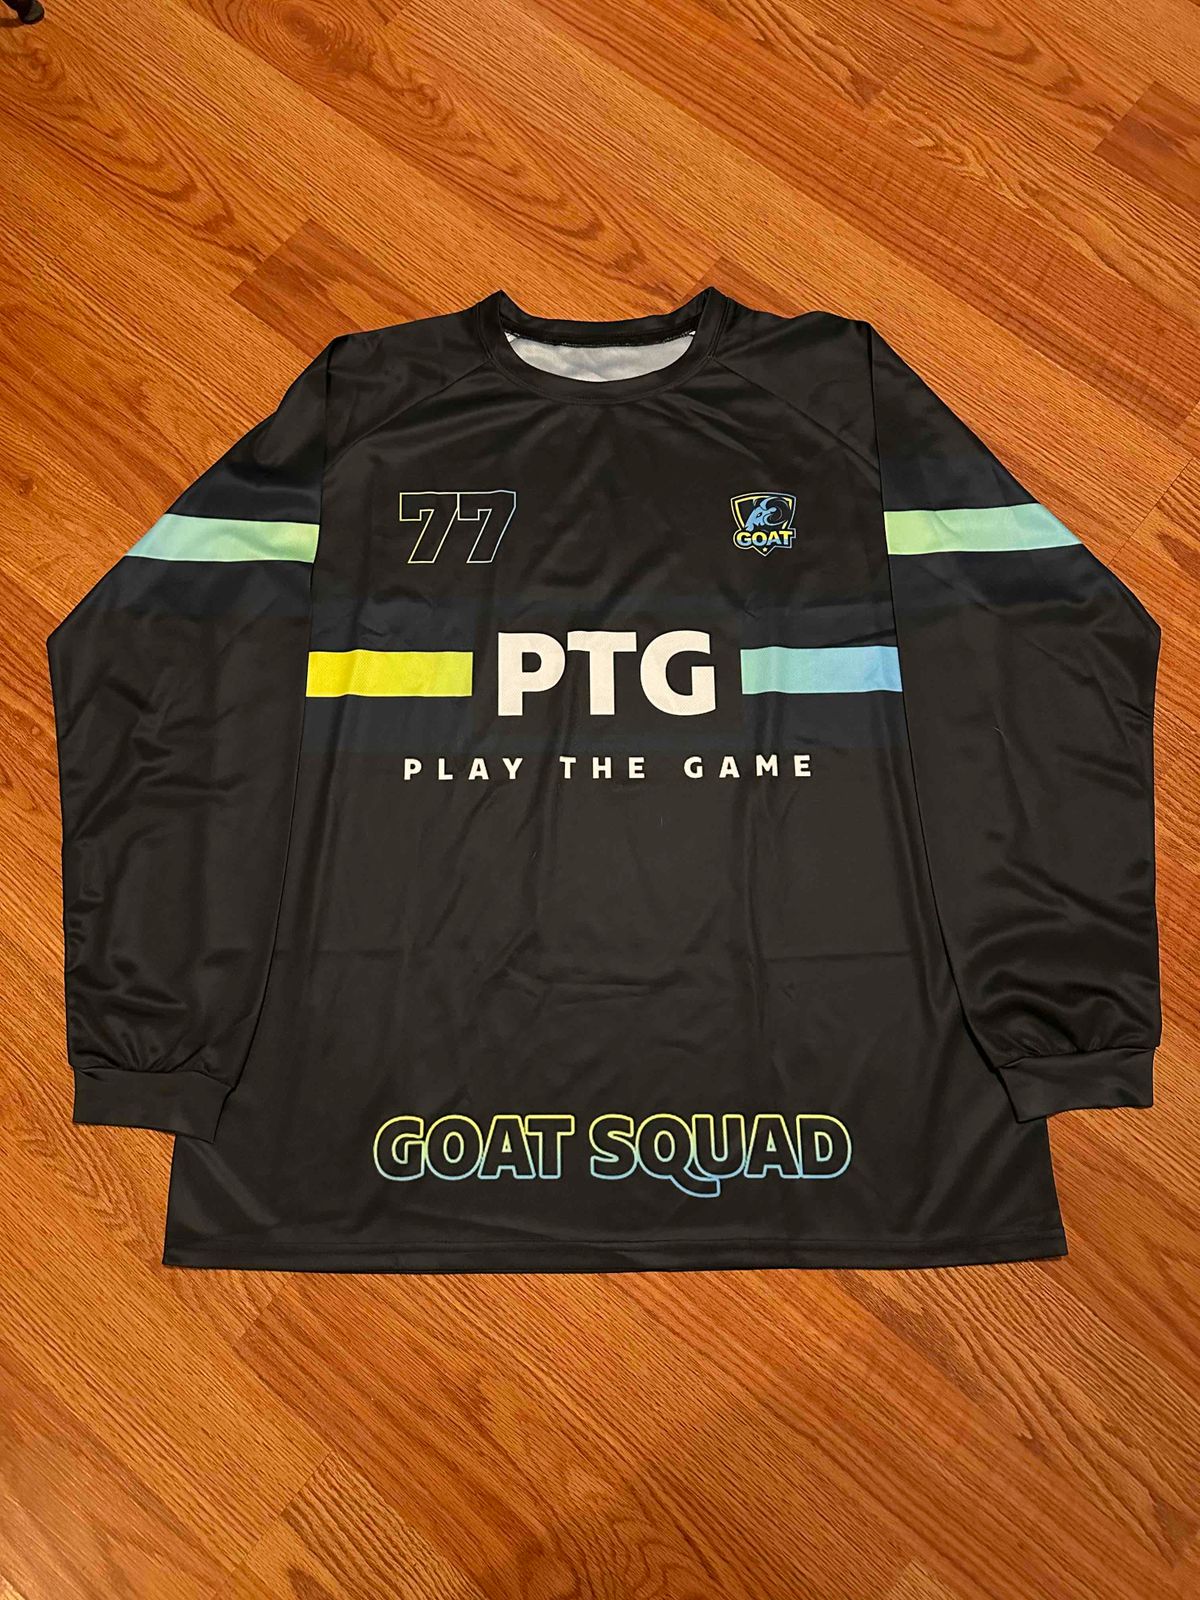 2022 World Cup PTG Goat Squad Andrew Sylvia jersey